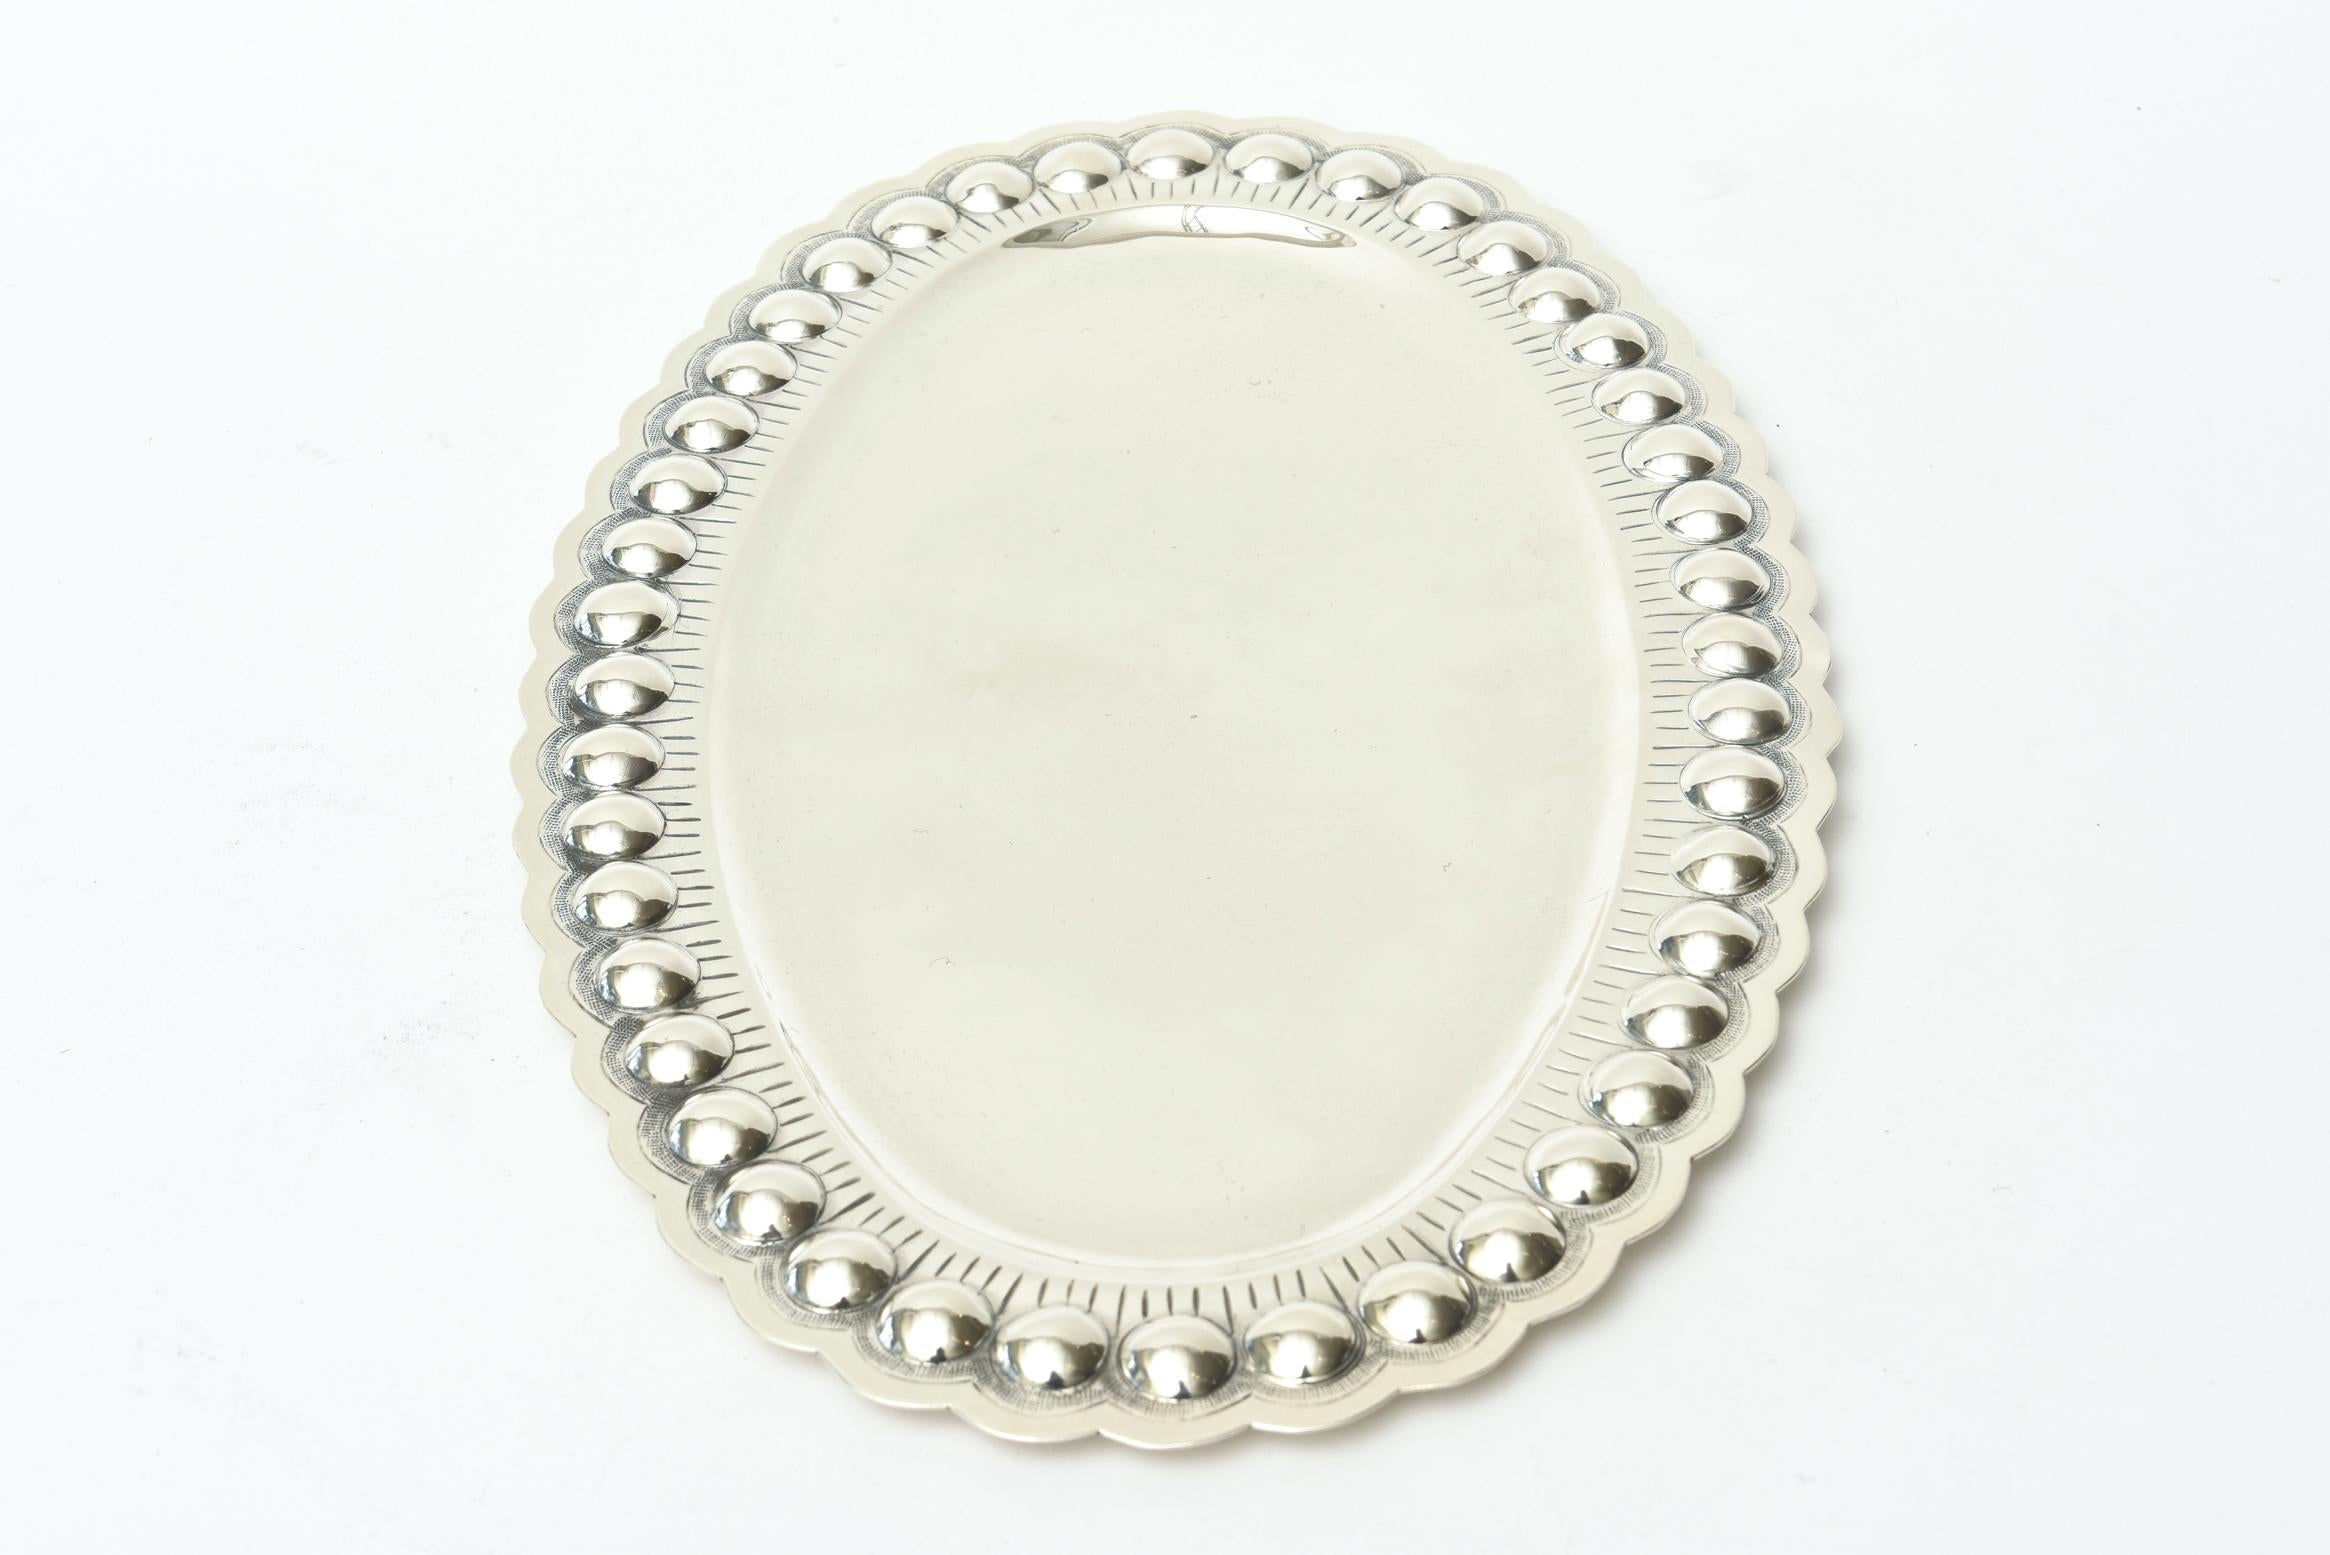 Mid-20th Century Sterling Silver Oval Platter or Tray With Balls, Barware Mid-Century Modern